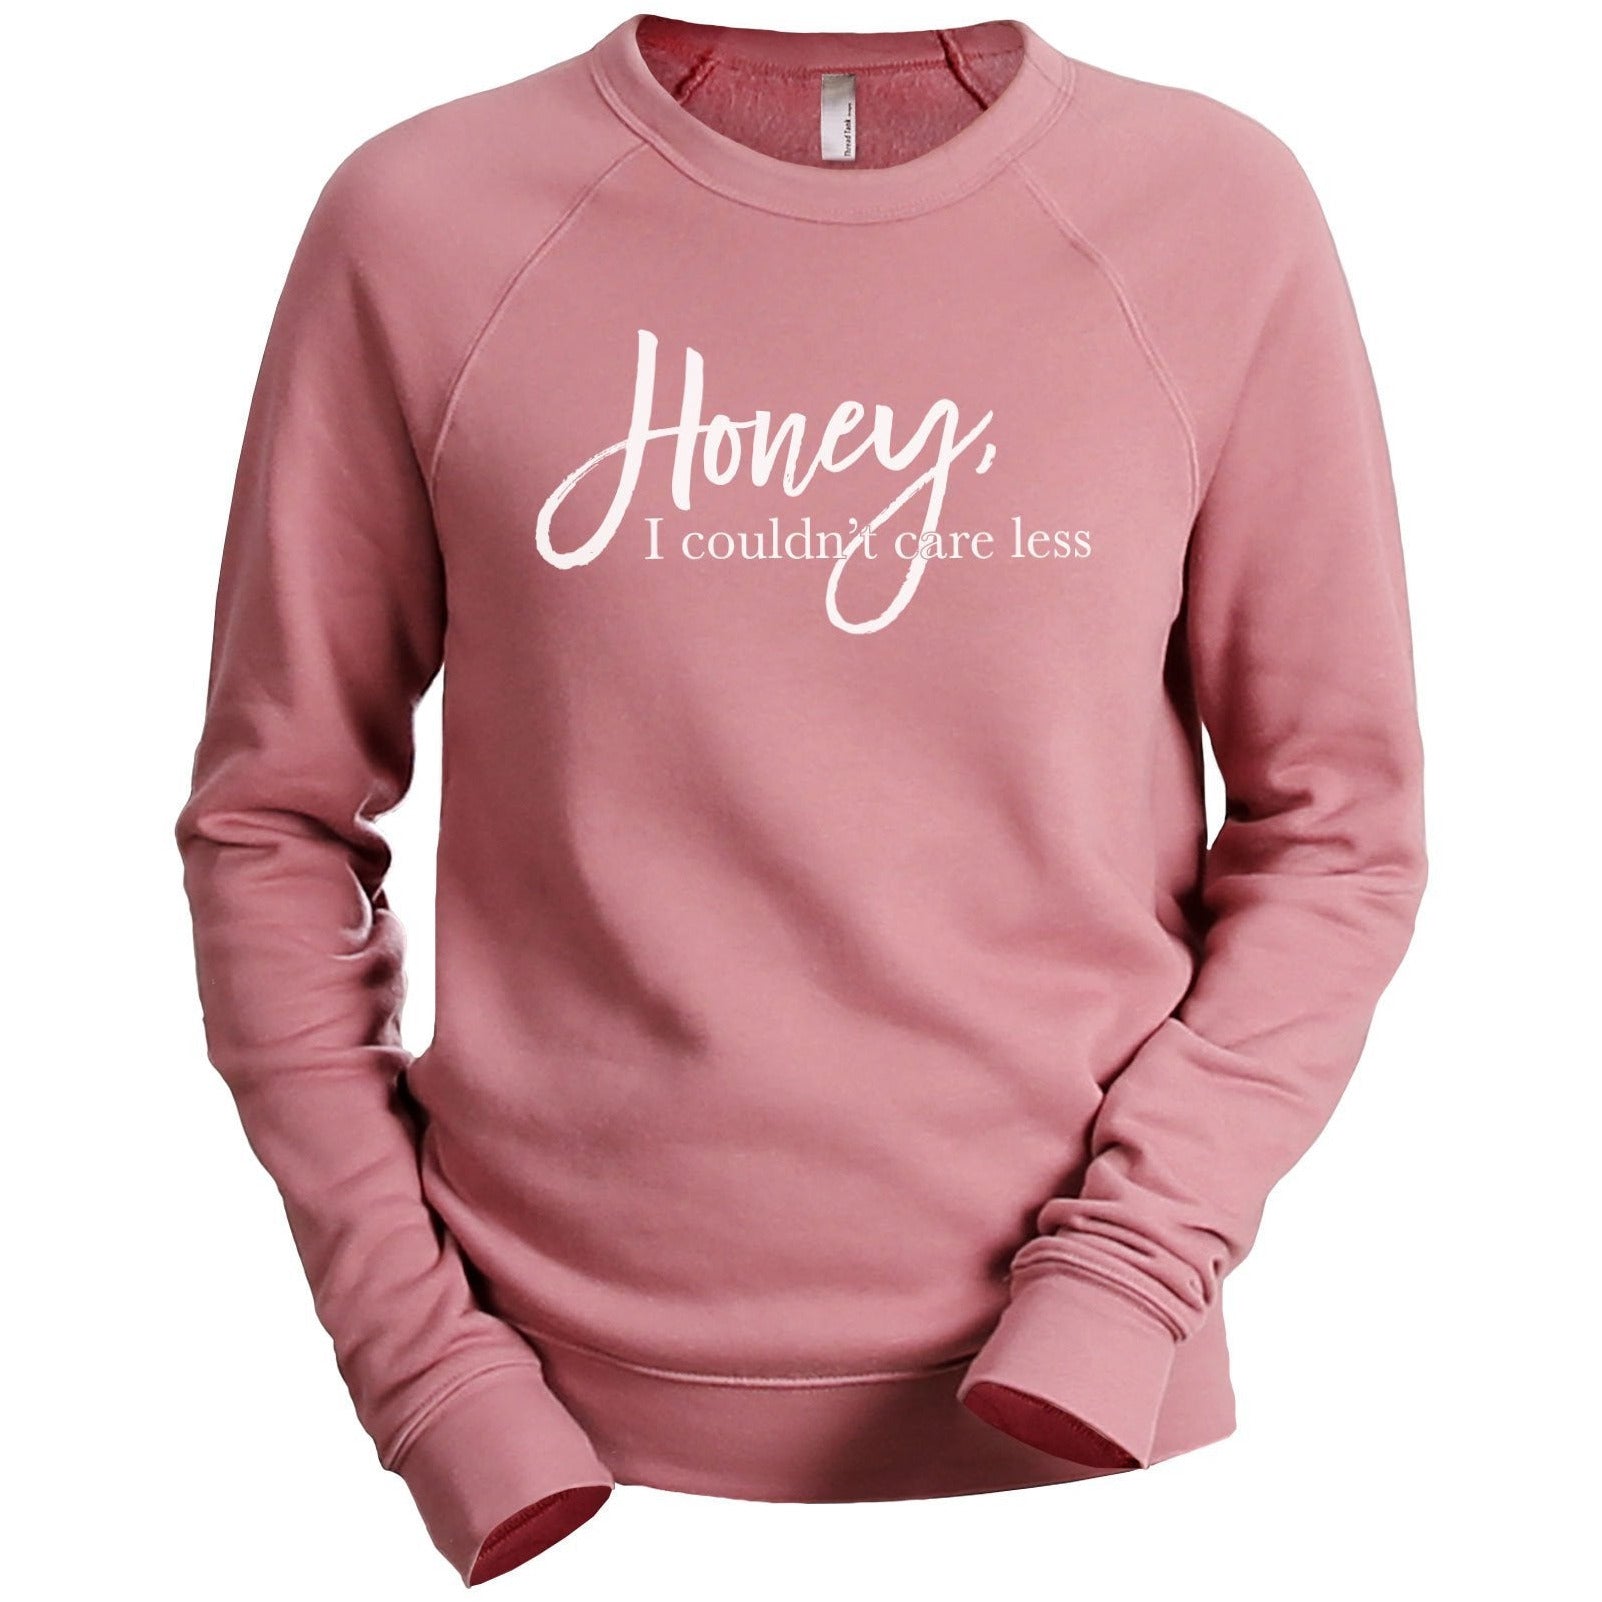 Honey I Couldn't Care Less Women's Cozy Fleece Longsleeves Sweater Rouge Closeup Details